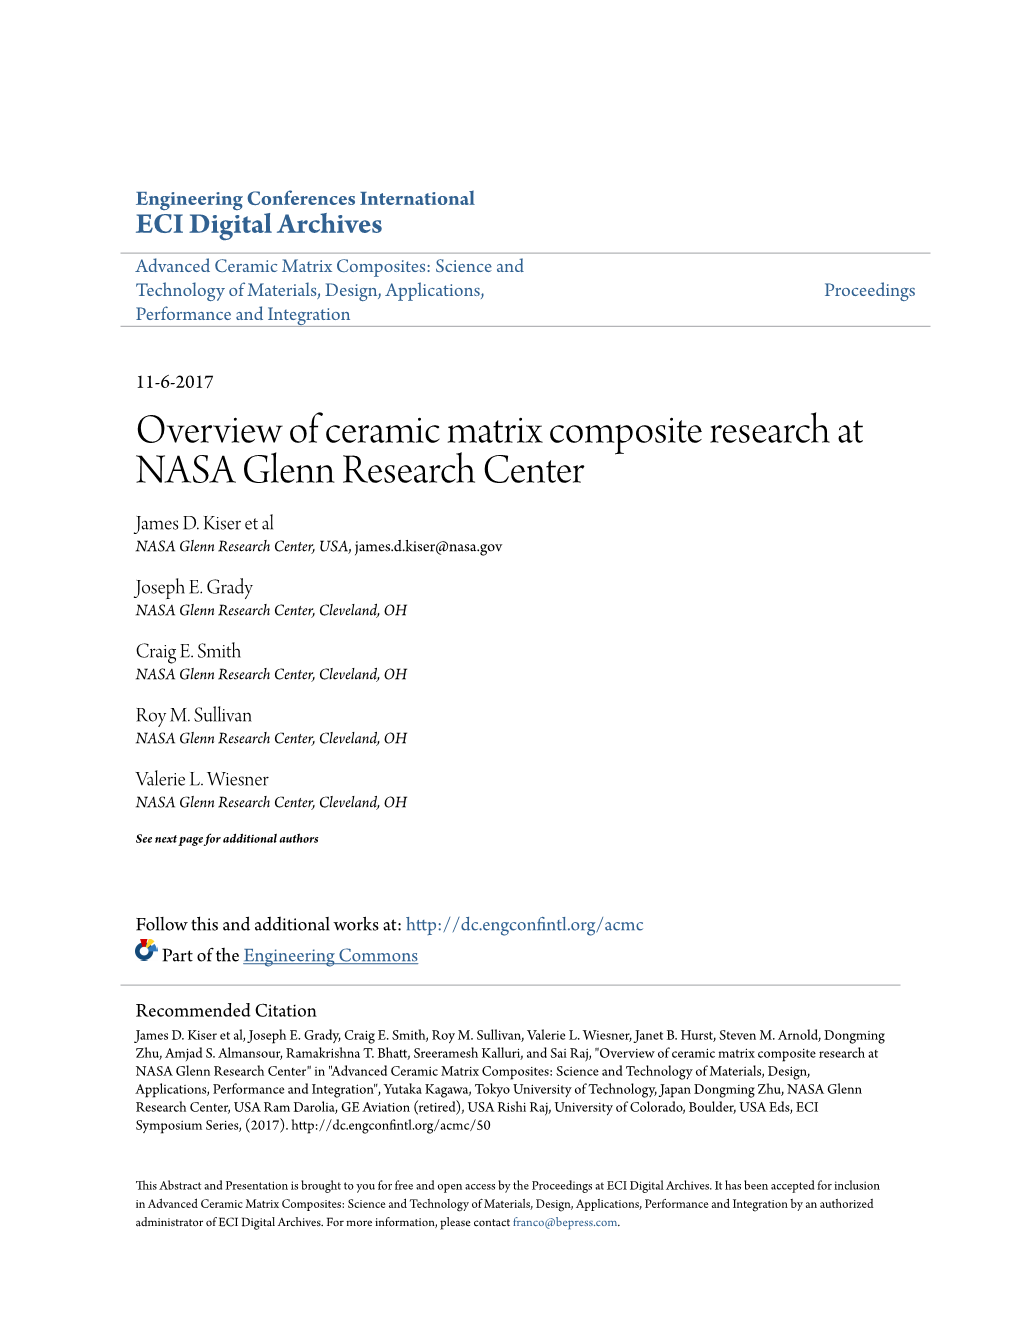 Overview of Ceramic Matrix Composite Research at NASA Glenn Research Center James D